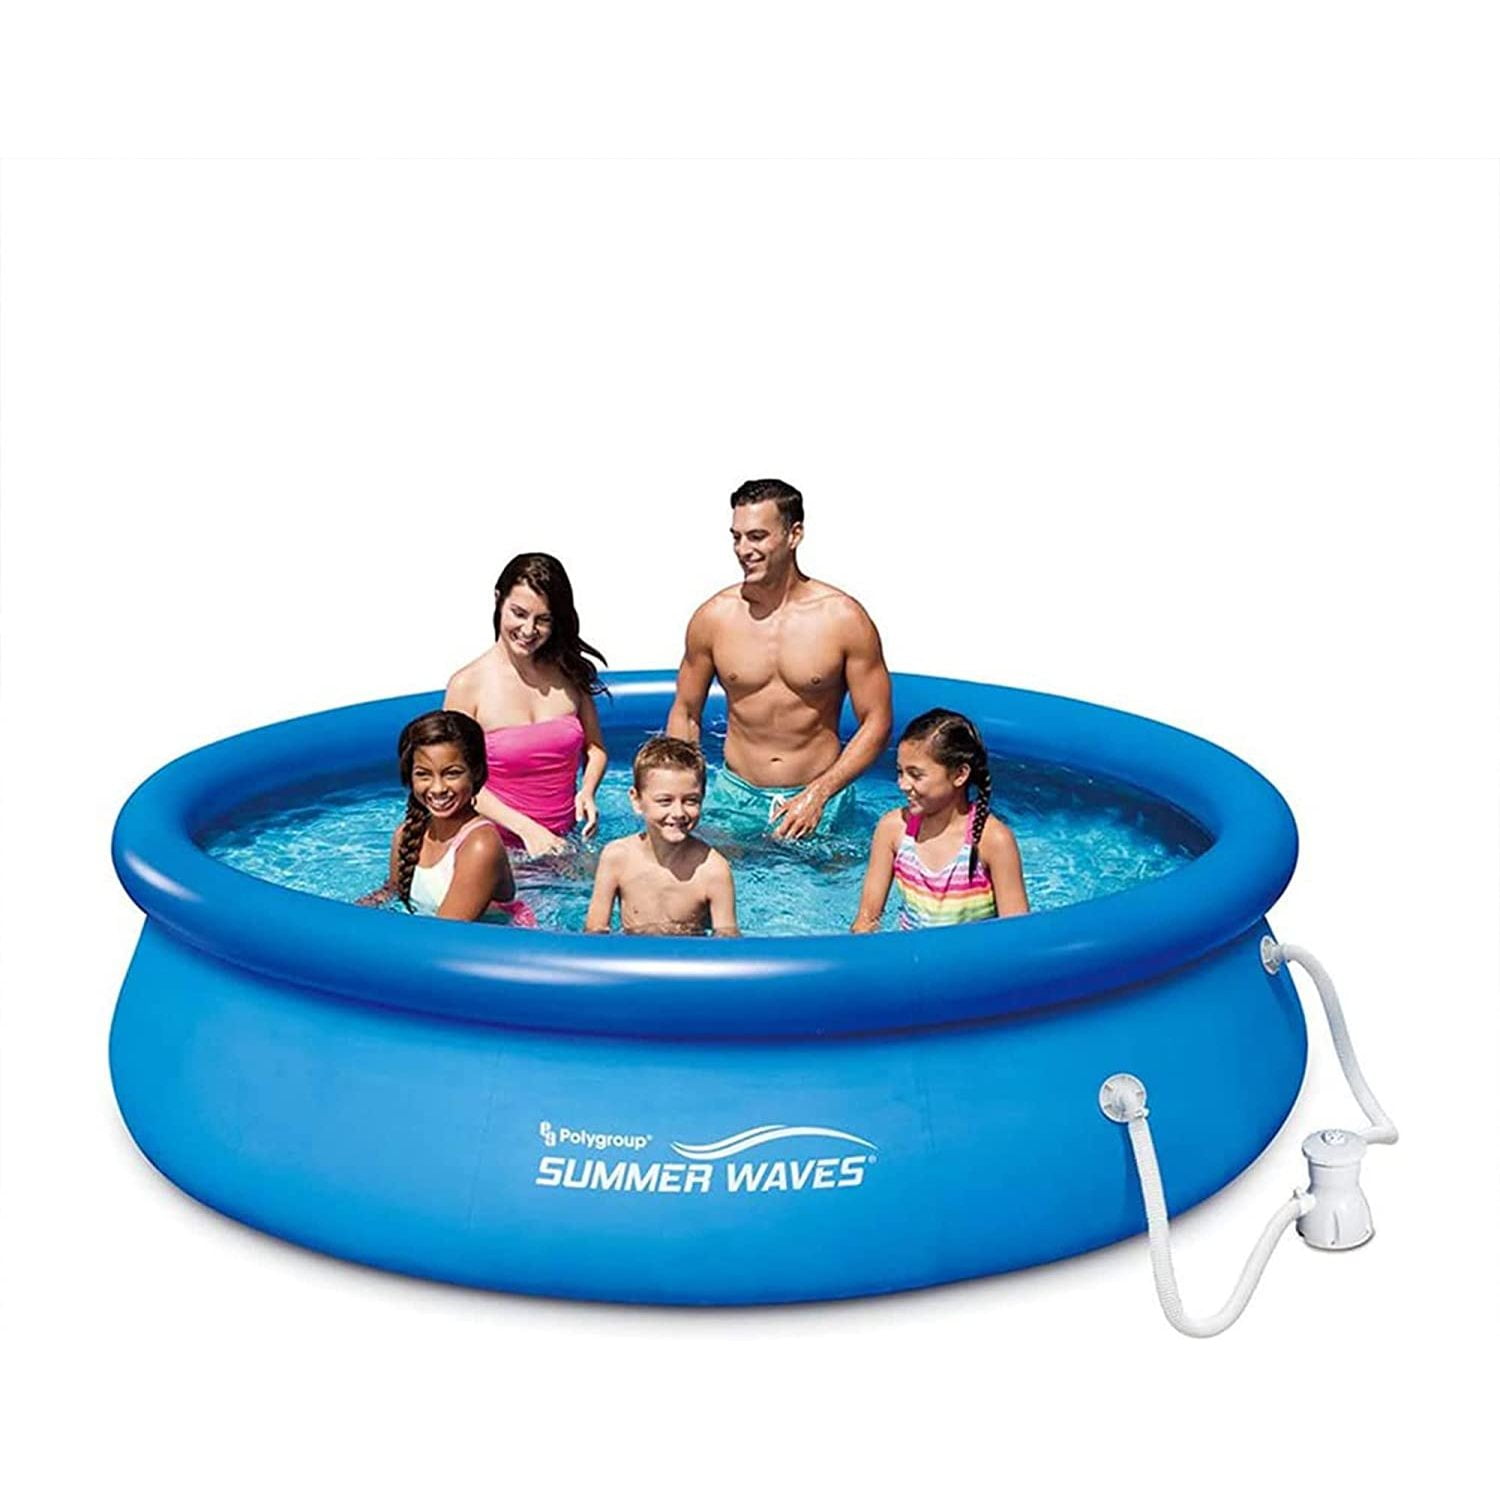 Summer Waves P1001030A Set Swimming x 10ft Filter 2.5ft Ring with RX300 Pump Blue Outdoor System, Quick Outdoor Inflatable GFCI Above Ground Pool